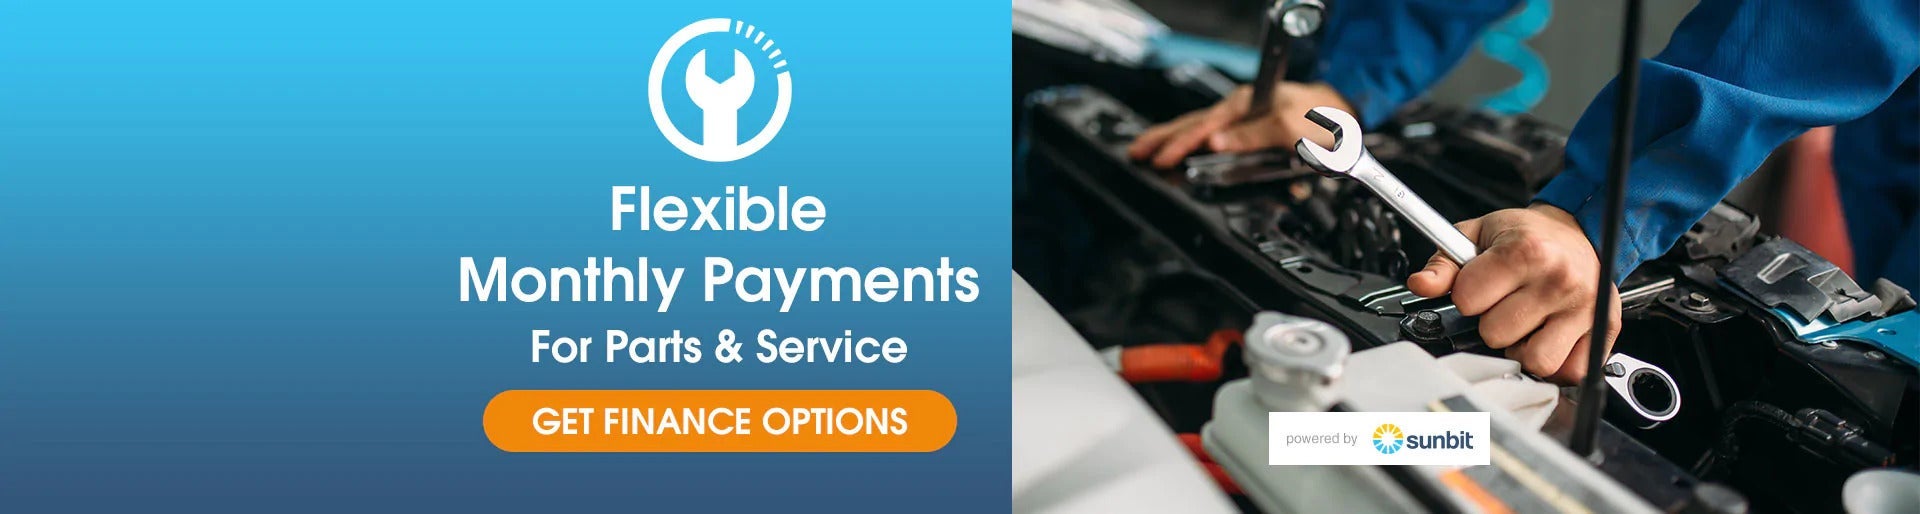 Flexible Monthly Payments on Parts and Service